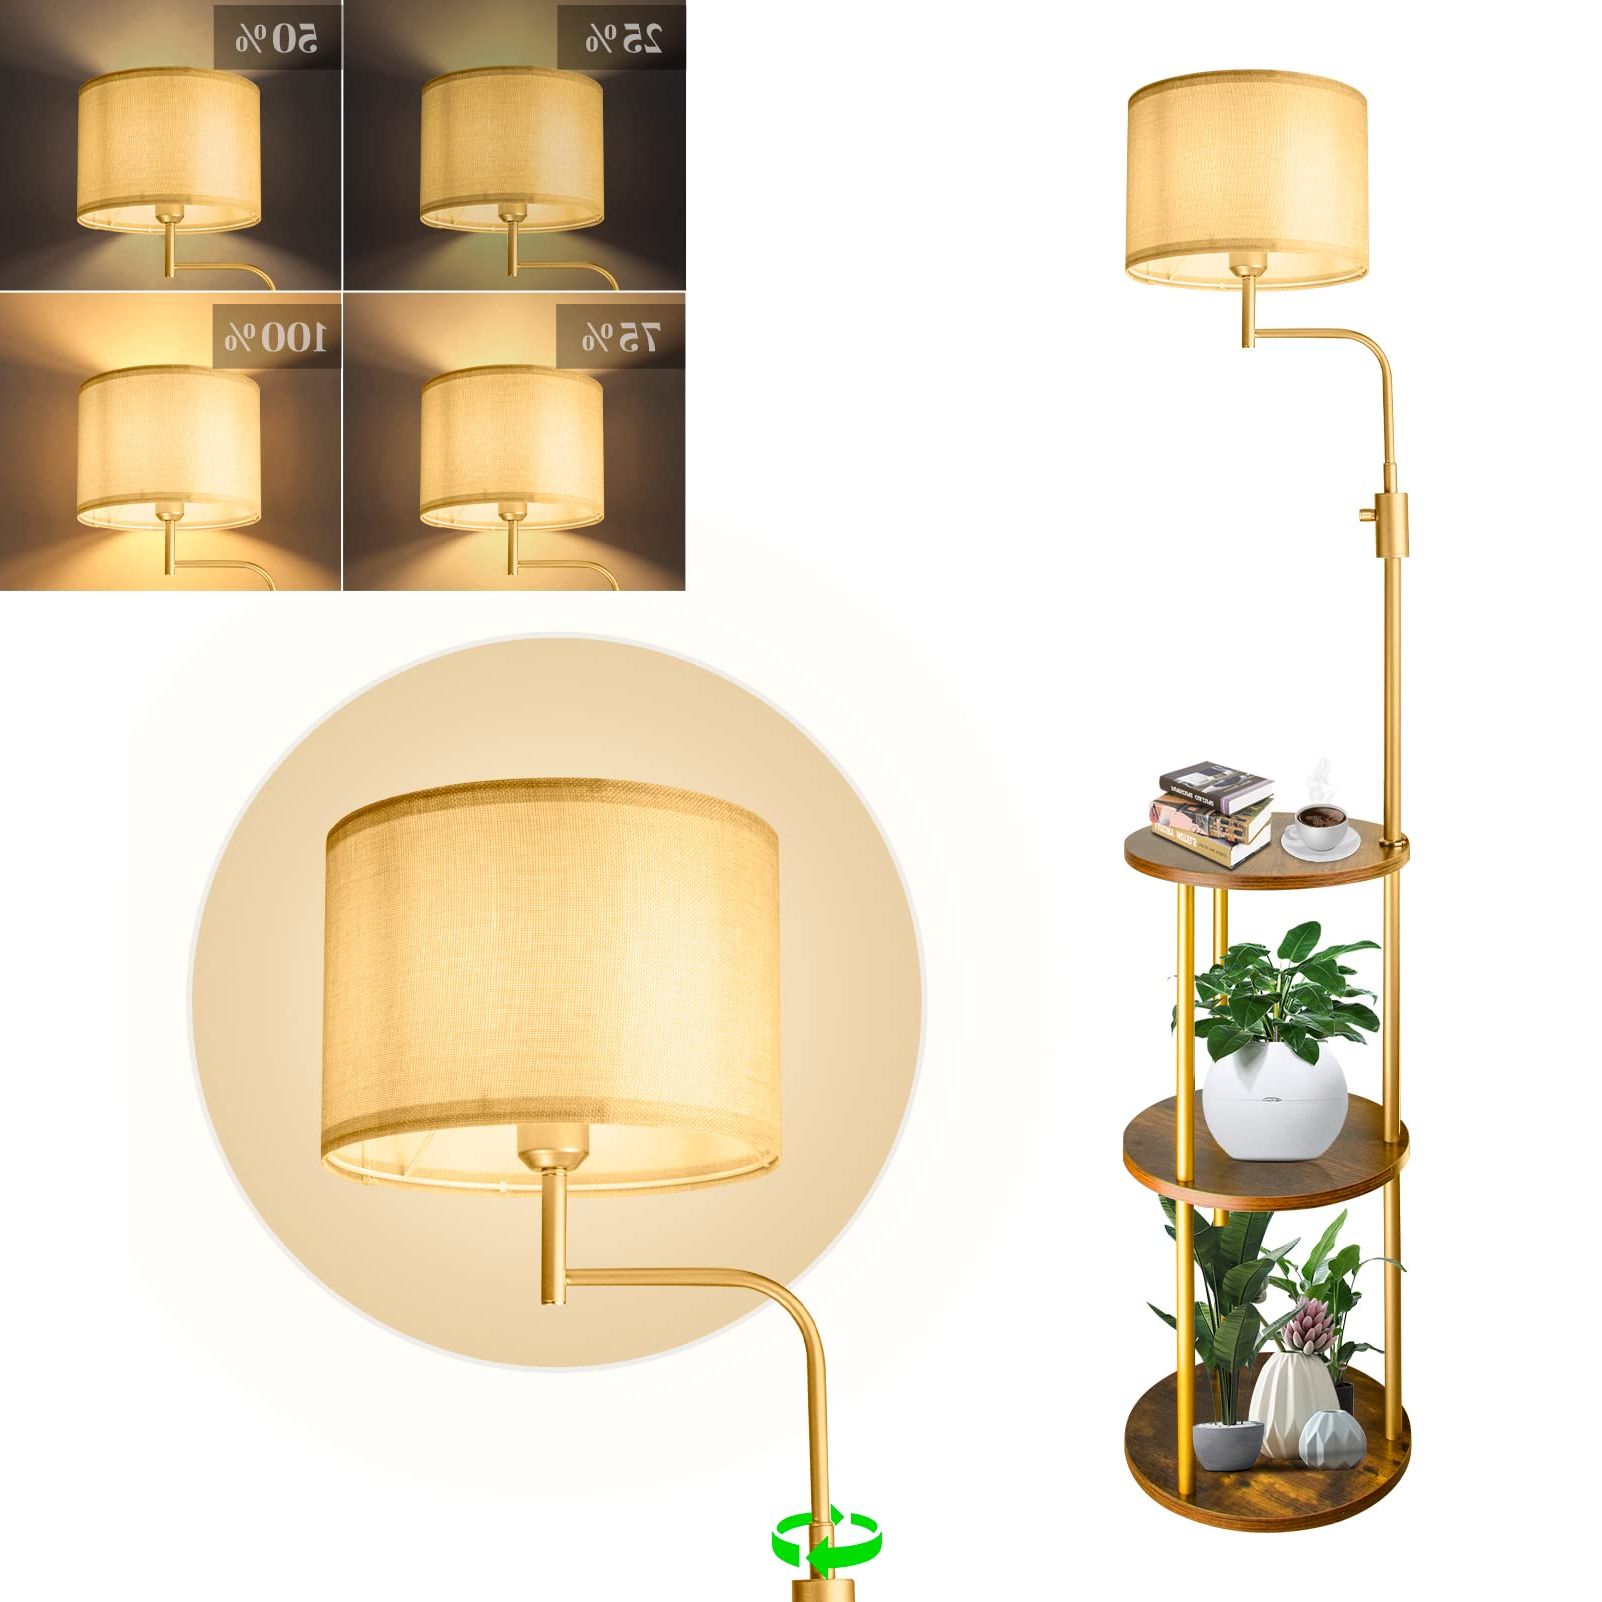 [%dimmable Floor Lamp With Shelves,3 Tier Round Shelf Floor Lamps With  Adjustable Direction,0% 100% Stepless Dimming, Storage Wood Texture,linen  Shade,display Standing Lamp For Living Room, Bedroom – – Amazon Within Most Up To Date Textured Linen Standing Lamps|textured Linen Standing Lamps With Regard To Trendy Dimmable Floor Lamp With Shelves,3 Tier Round Shelf Floor Lamps With  Adjustable Direction,0% 100% Stepless Dimming, Storage Wood Texture,linen  Shade,display Standing Lamp For Living Room, Bedroom – – Amazon|recent Textured Linen Standing Lamps Throughout Dimmable Floor Lamp With Shelves,3 Tier Round Shelf Floor Lamps With  Adjustable Direction,0% 100% Stepless Dimming, Storage Wood Texture,linen  Shade,display Standing Lamp For Living Room, Bedroom – – Amazon|popular Dimmable Floor Lamp With Shelves,3 Tier Round Shelf Floor Lamps With  Adjustable Direction,0% 100% Stepless Dimming, Storage Wood Texture,linen  Shade,display Standing Lamp For Living Room, Bedroom – – Amazon Within Textured Linen Standing Lamps%] (View 6 of 10)